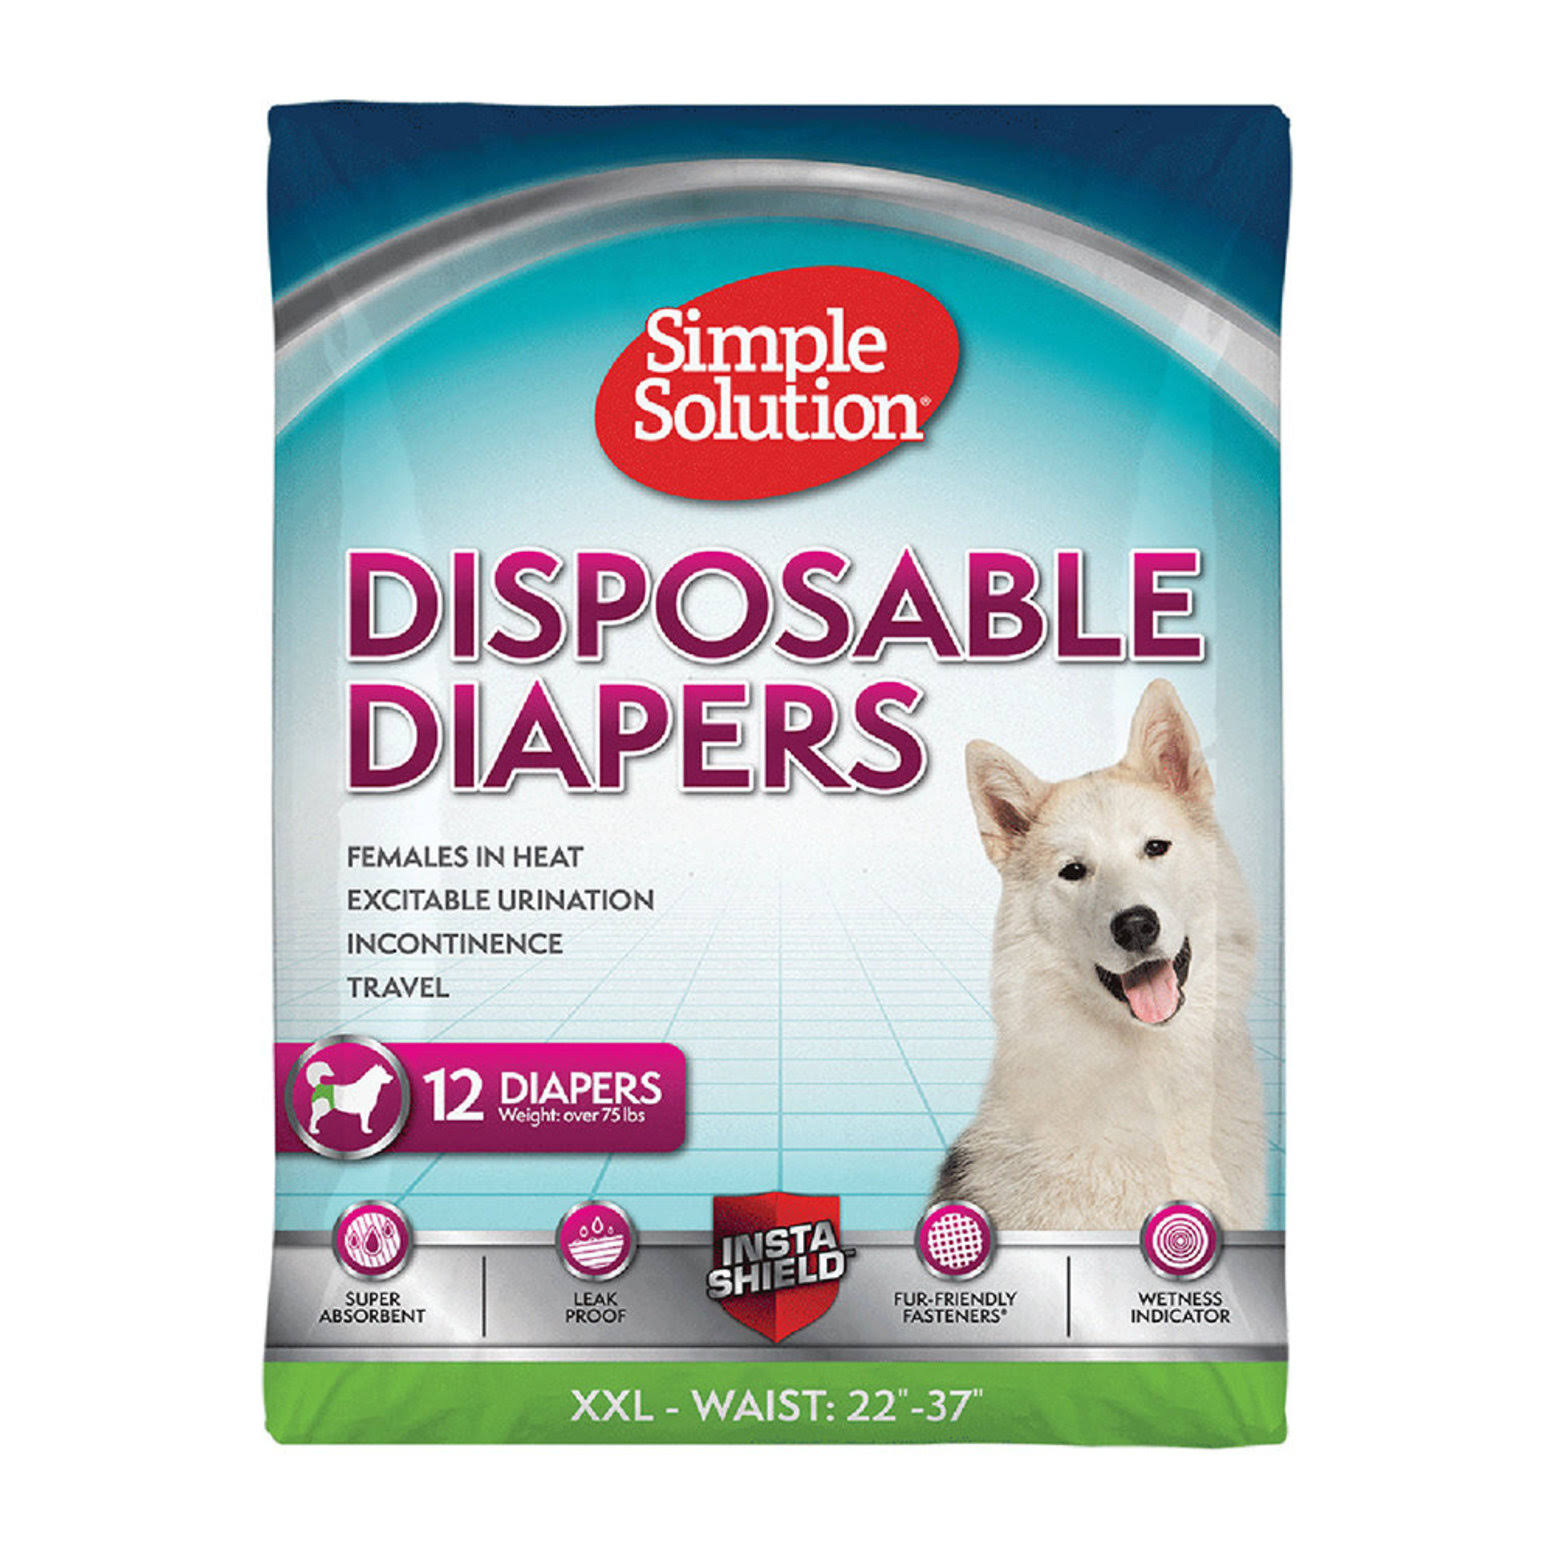 Simple Solution 12 Disposable Diapers, XX-Large